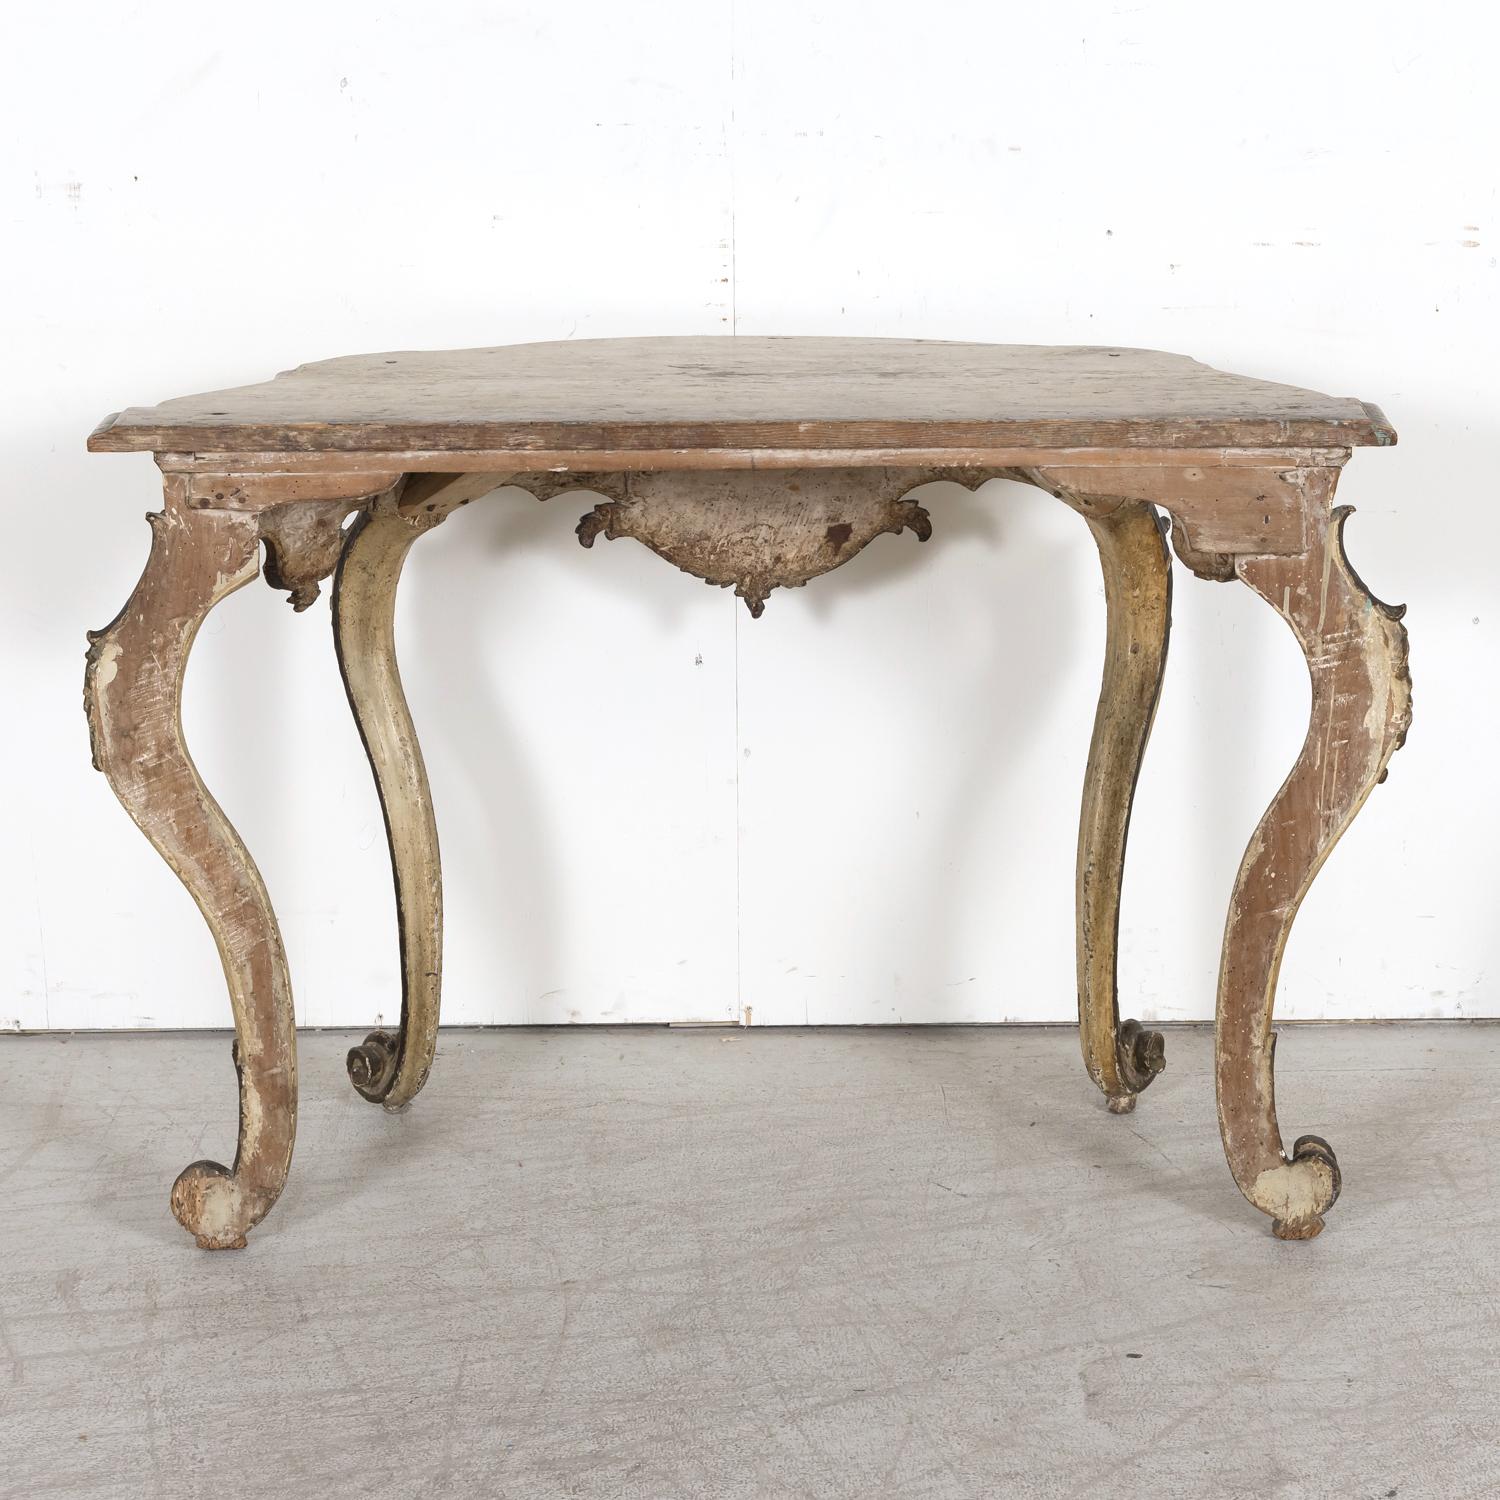 19th Century Italian Rococo Style Painted and Parcel Gilt Console Table For Sale 12